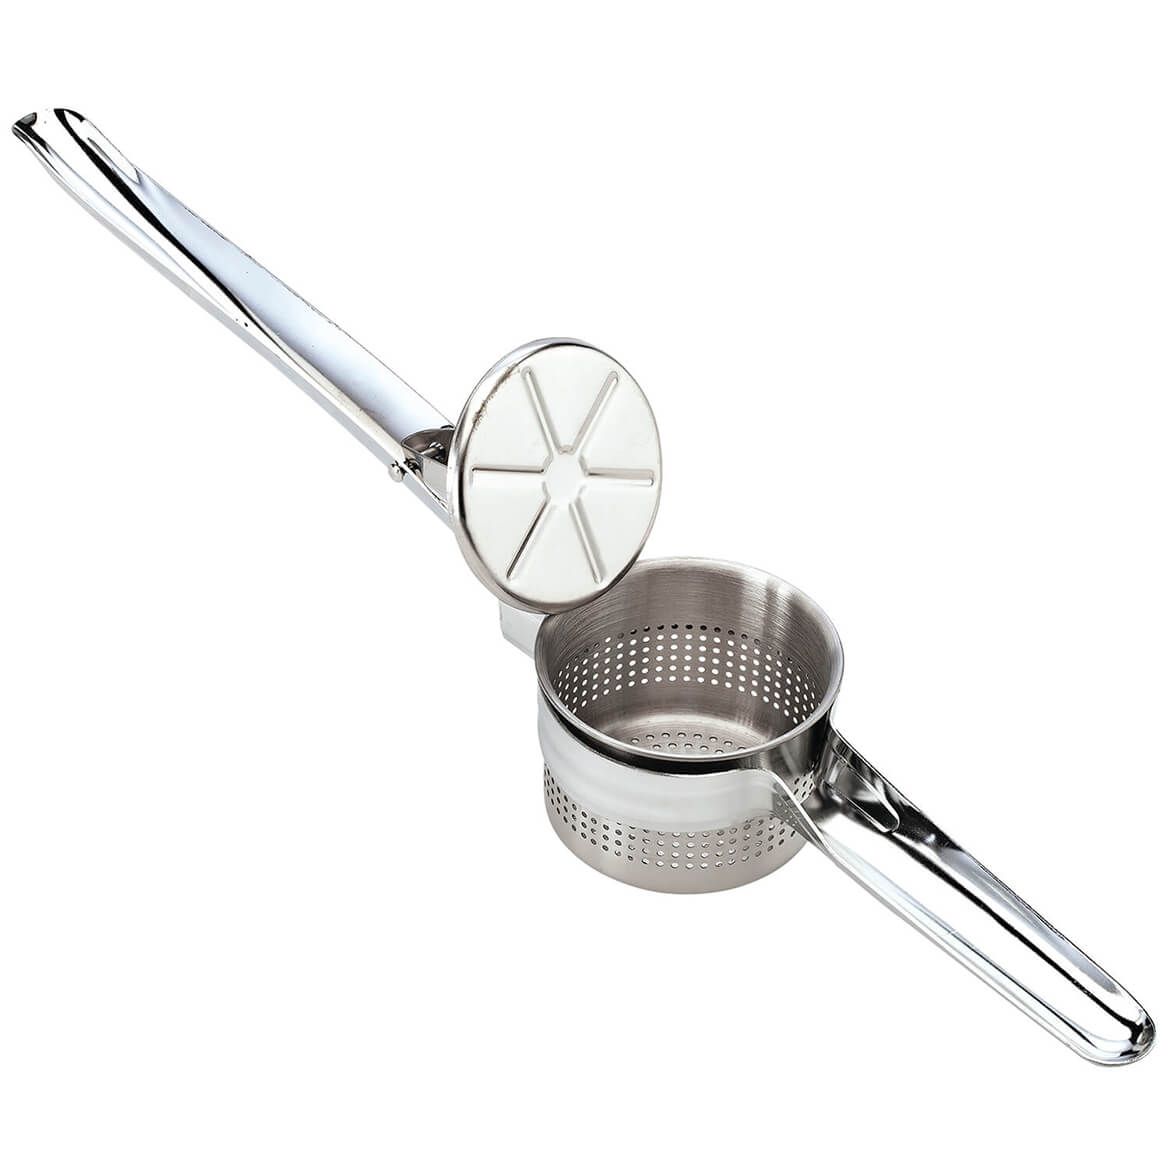 Stainless Steel Food Masher and Ricer + '-' + 372359